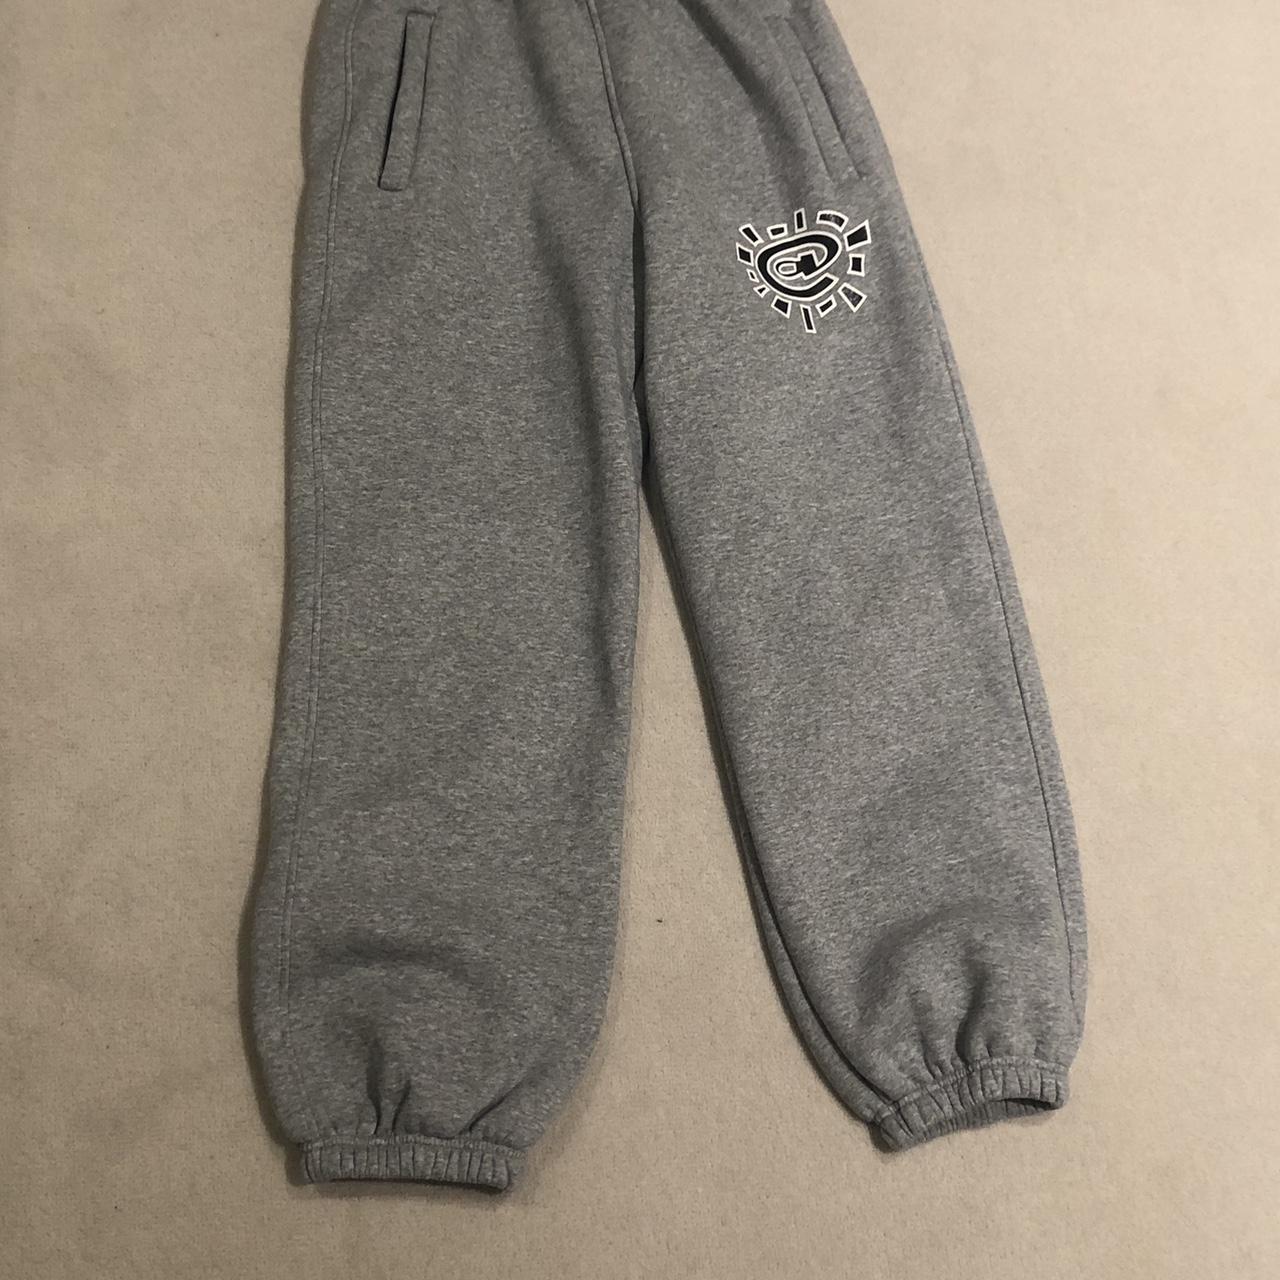 ADWYSD Grey Tracksuit pants Medium size New with tags - Depop